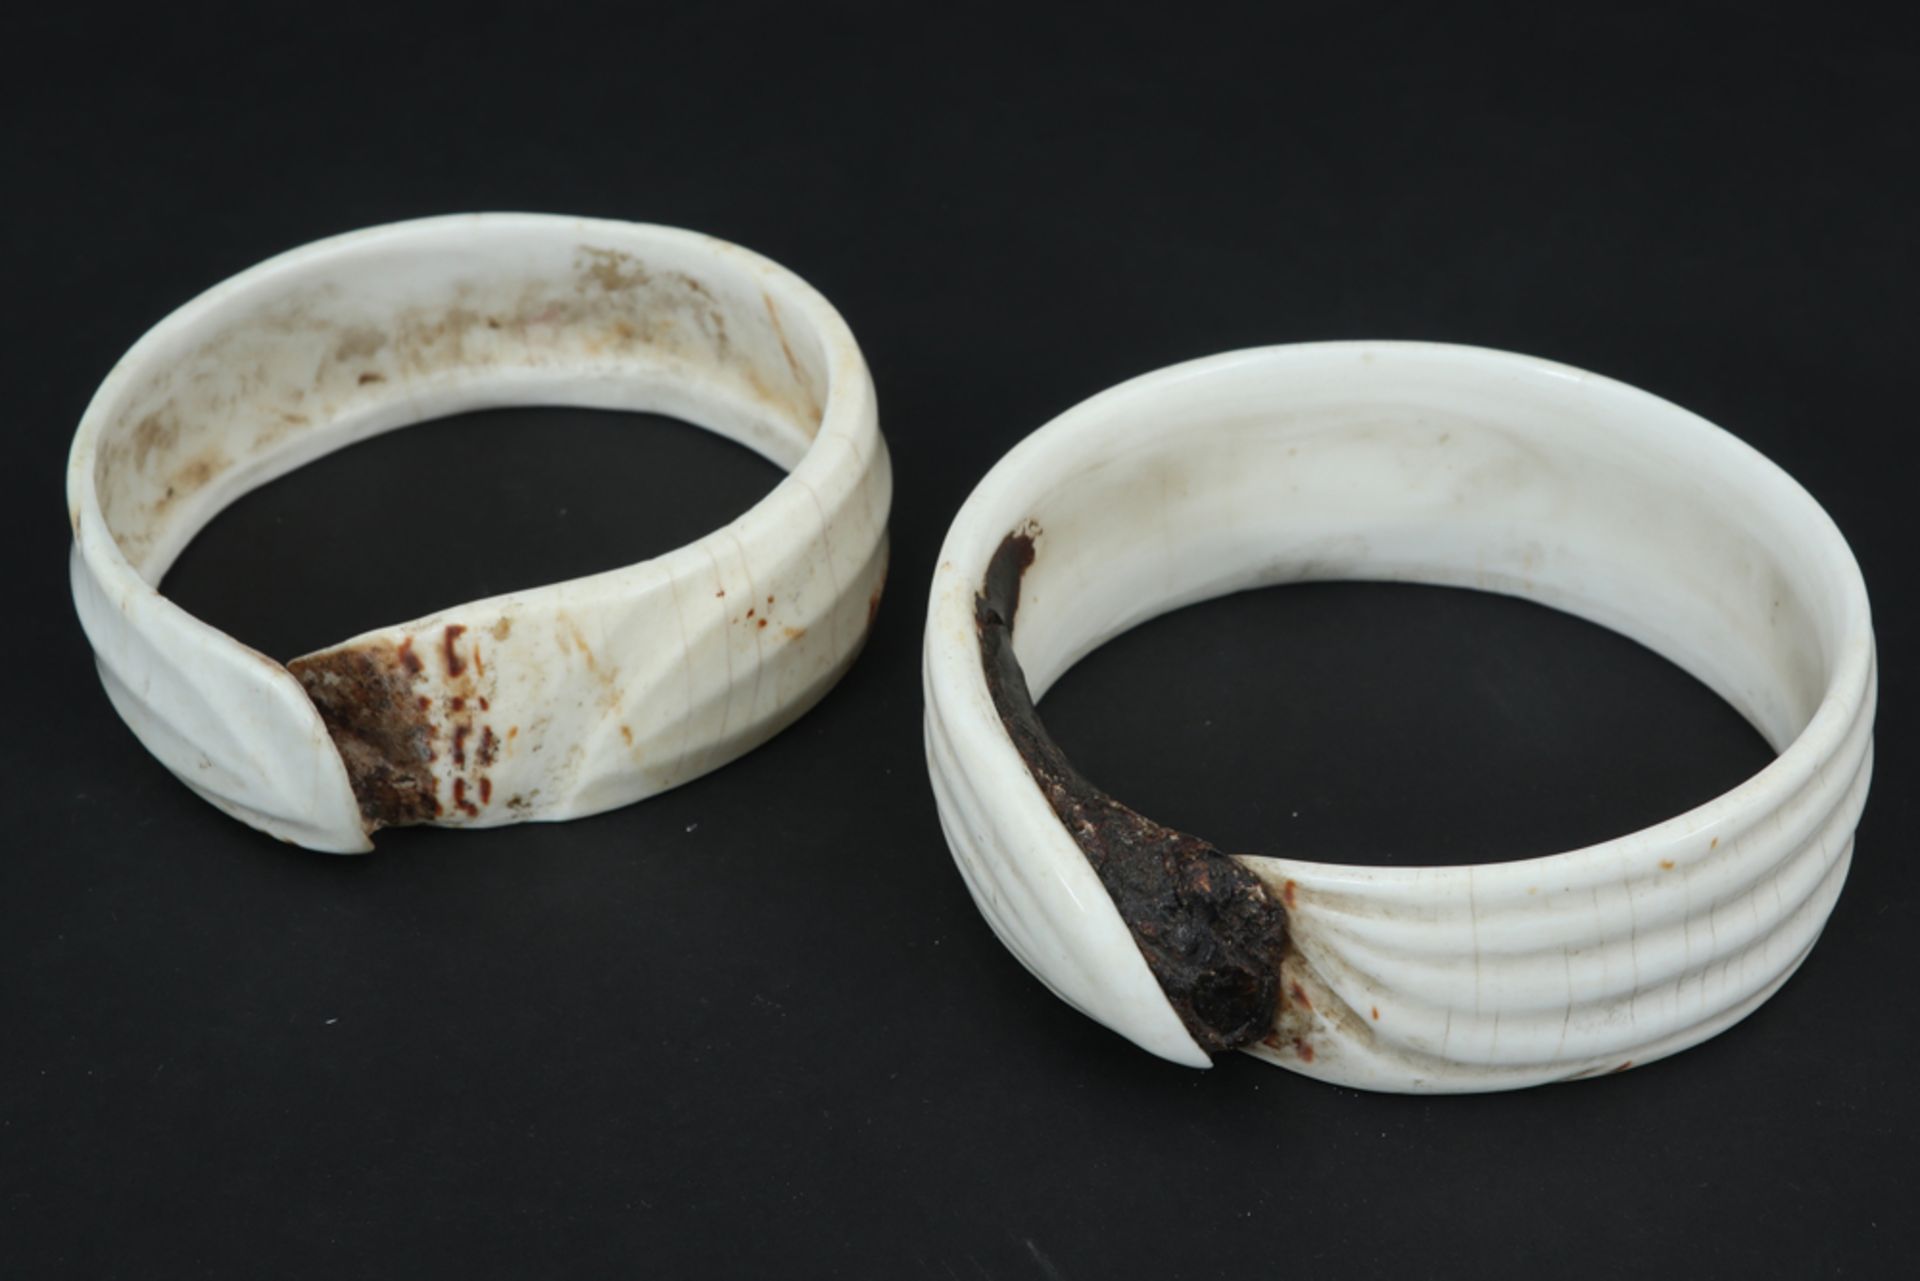 pair of Indonesian Borneo bangles in shell (with vegetal resin) || INDONESIË - BORNEO paar armbanden - Image 2 of 4